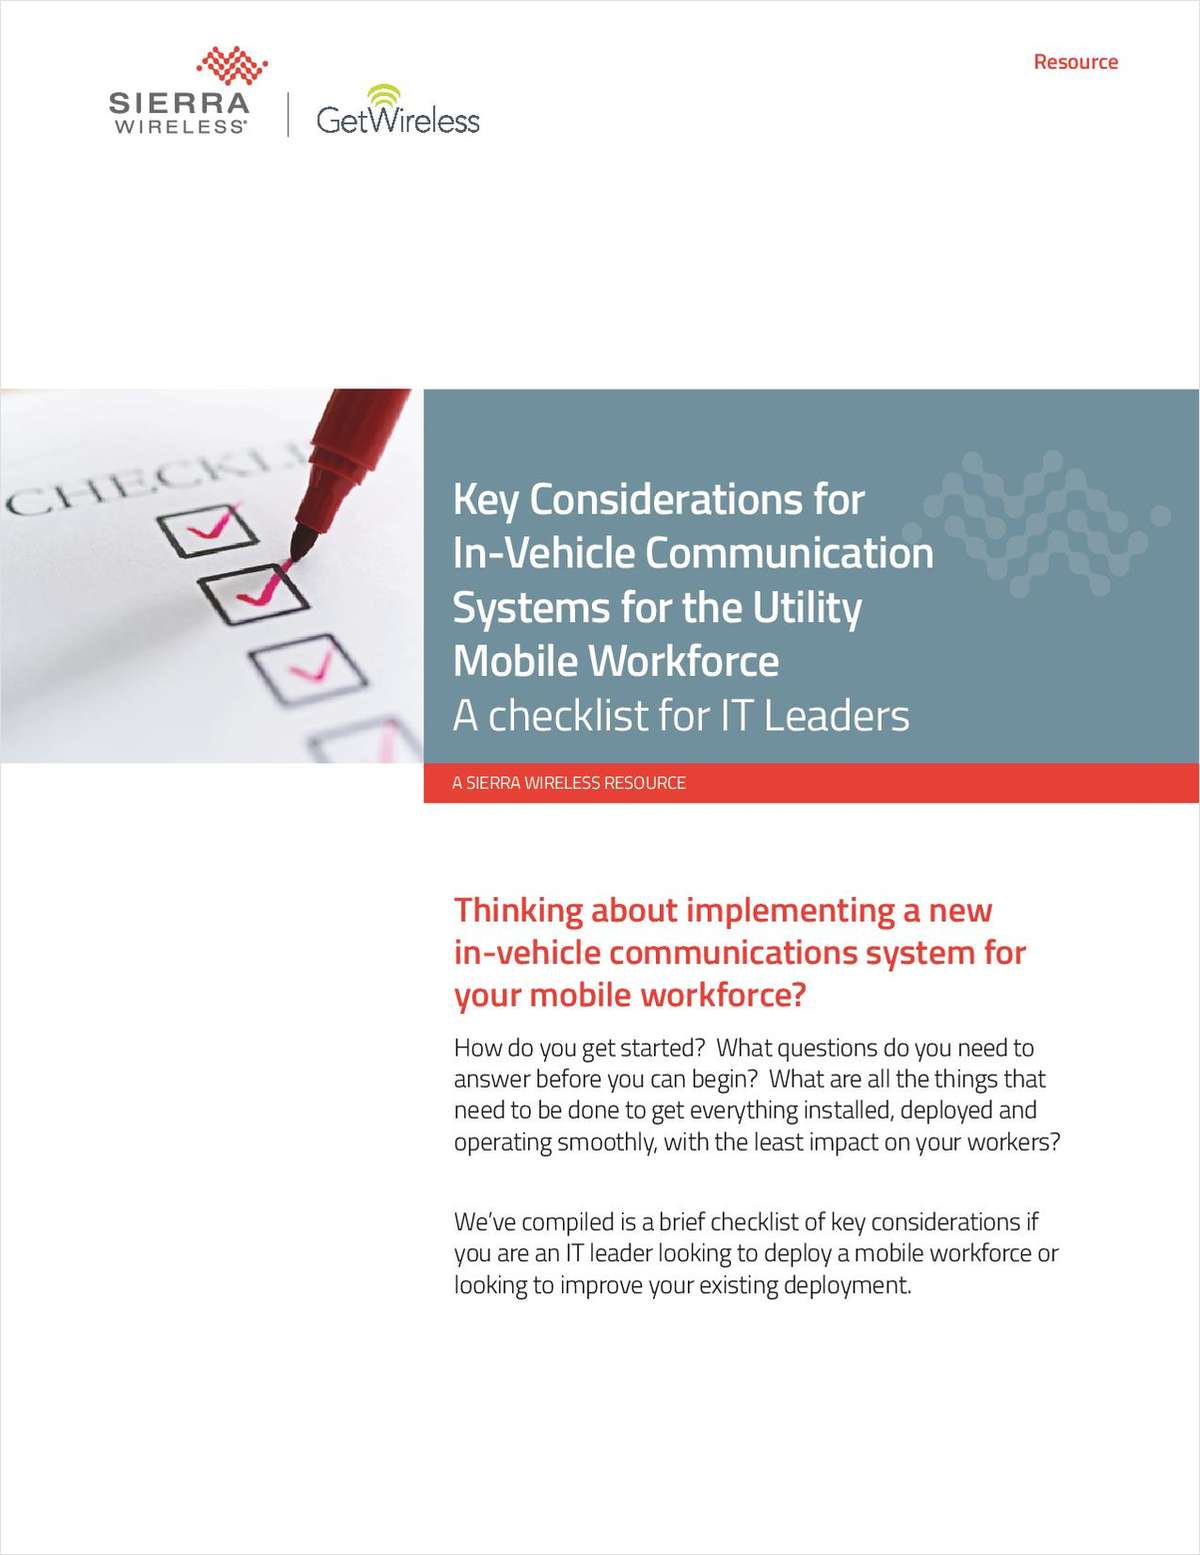 Key Considerations for In-Vehicle Communication Systems